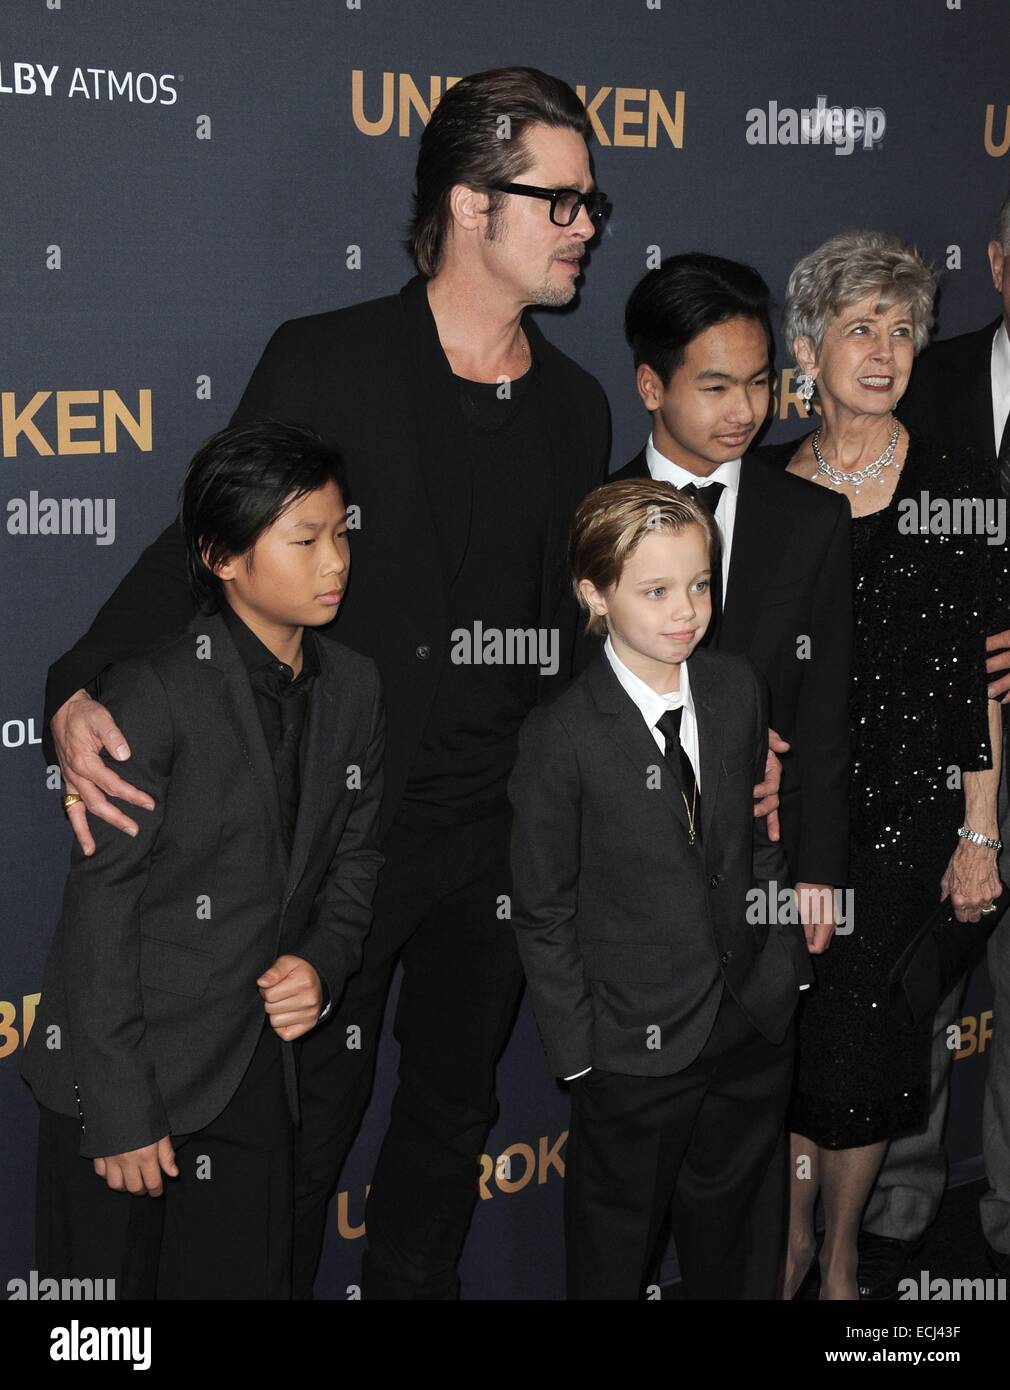 Los Angeles, CA, USA. 15th Dec, 2014. Brad Pitt, Pax Thien Jolie-Pitt, Shiloh Nouvel Jolie-Pitt, Maddox Jolie-Pitt at arrivals for UNBROKEN Premiere, TCL Chinese 6 Theatres (formerly Grauman's), Los Angeles, CA December 15, 2014. Credit:  Dee Cercone/Everett Collection/Alamy Live News Stock Photo